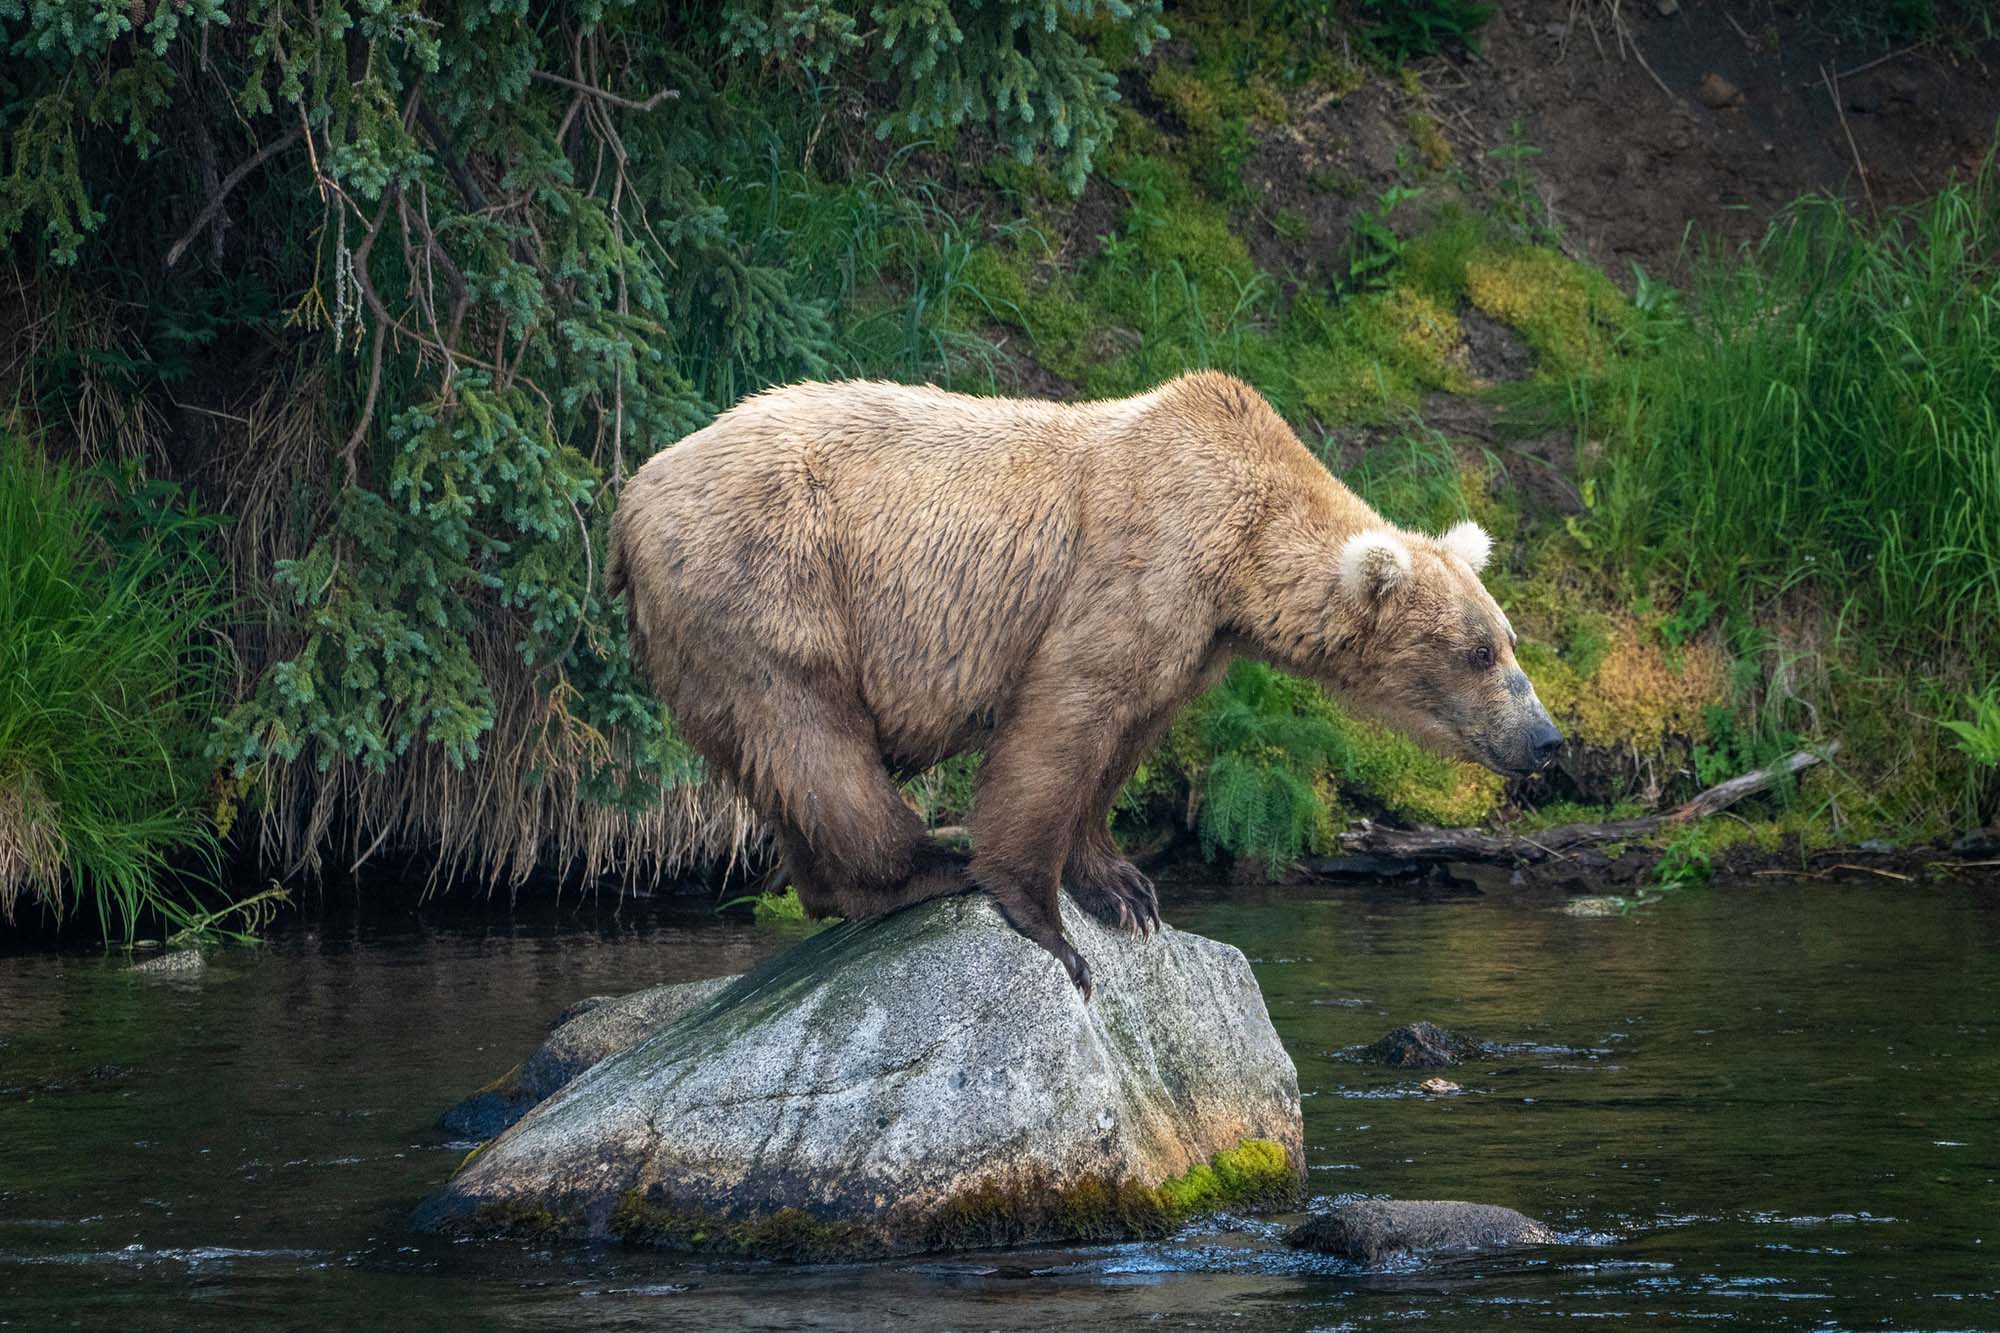 A brown bear perched on a rock in a river.